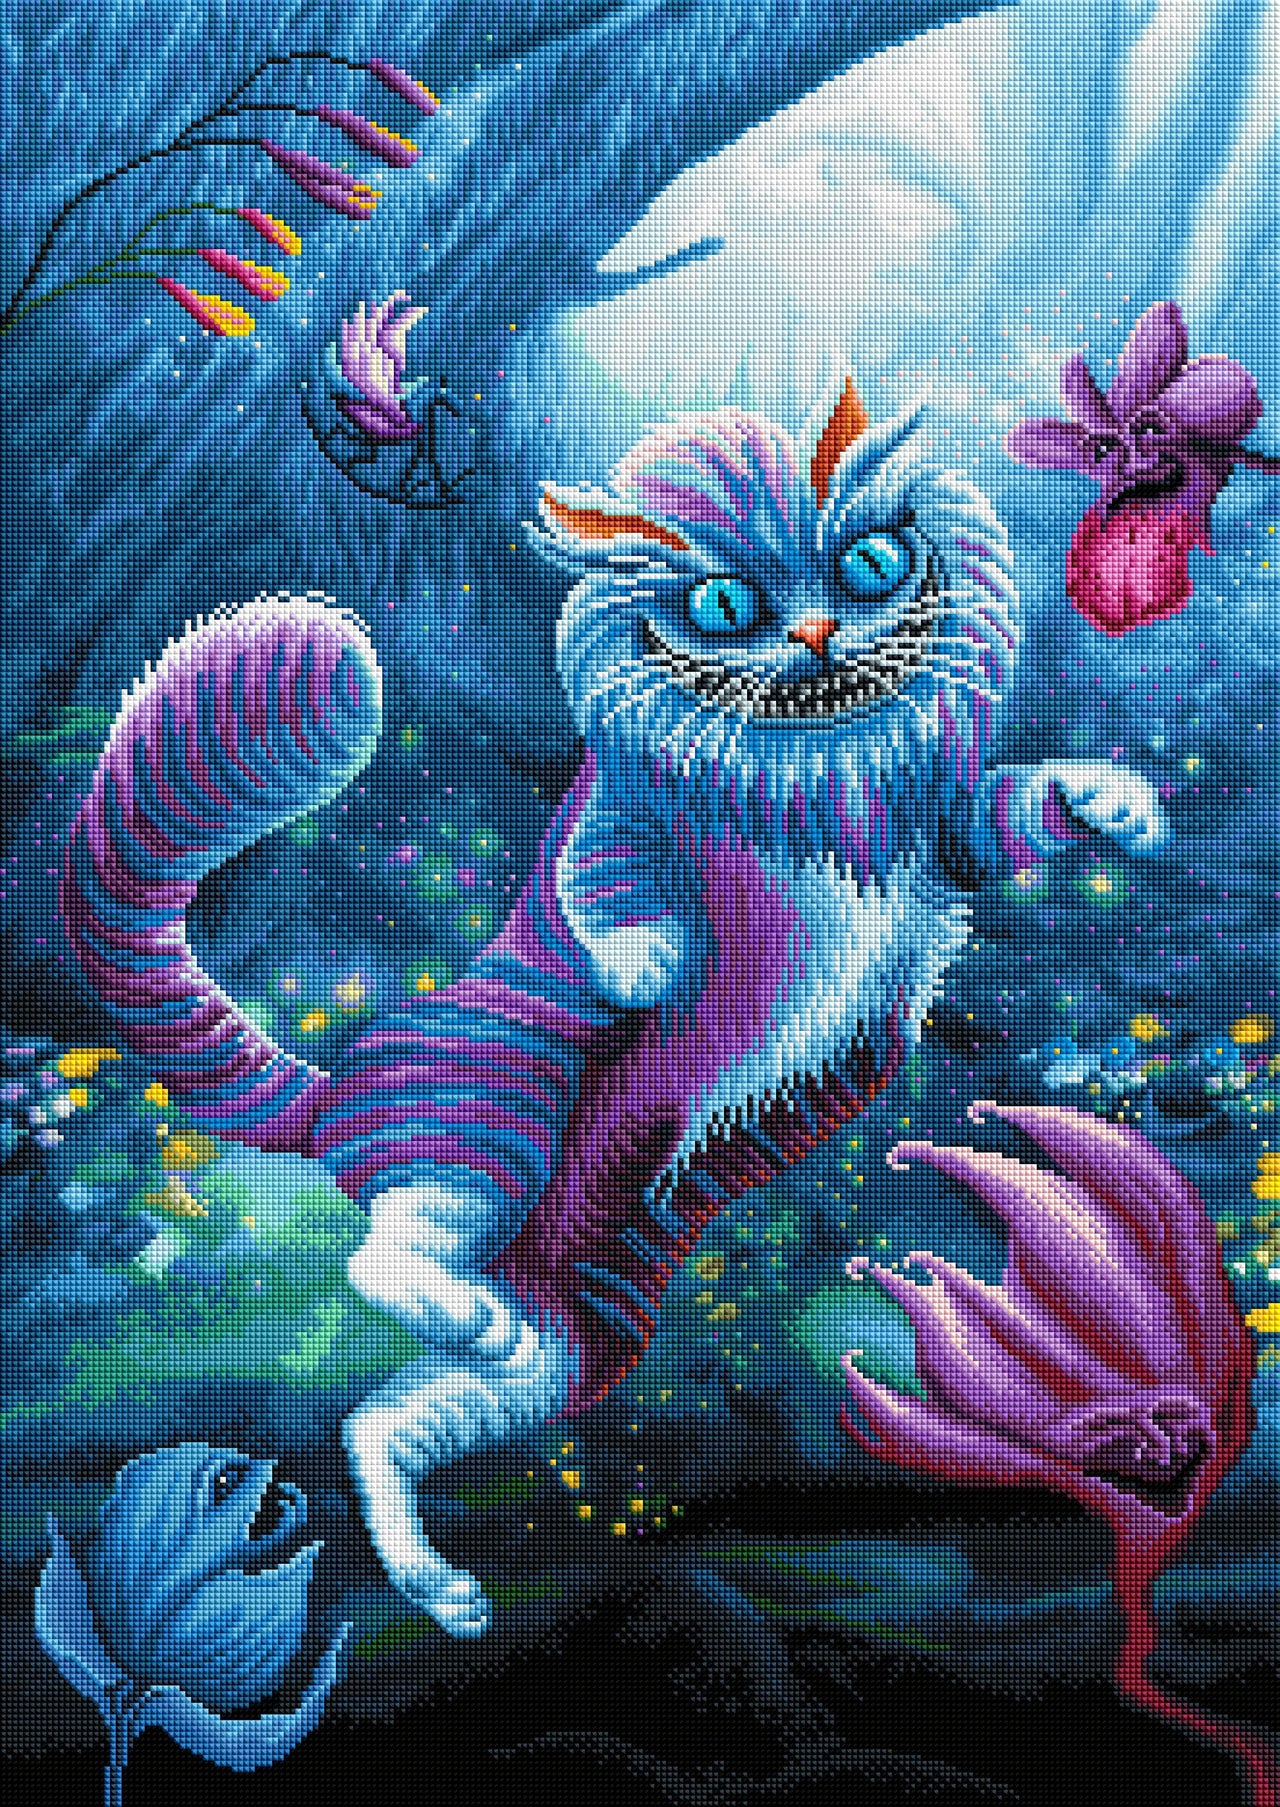 Diamond Painting Blue Eyed Cheshire Cat 22" x 31" (56cm x 79cm) / Square with 60 Colors including 4 ABs / 68,952